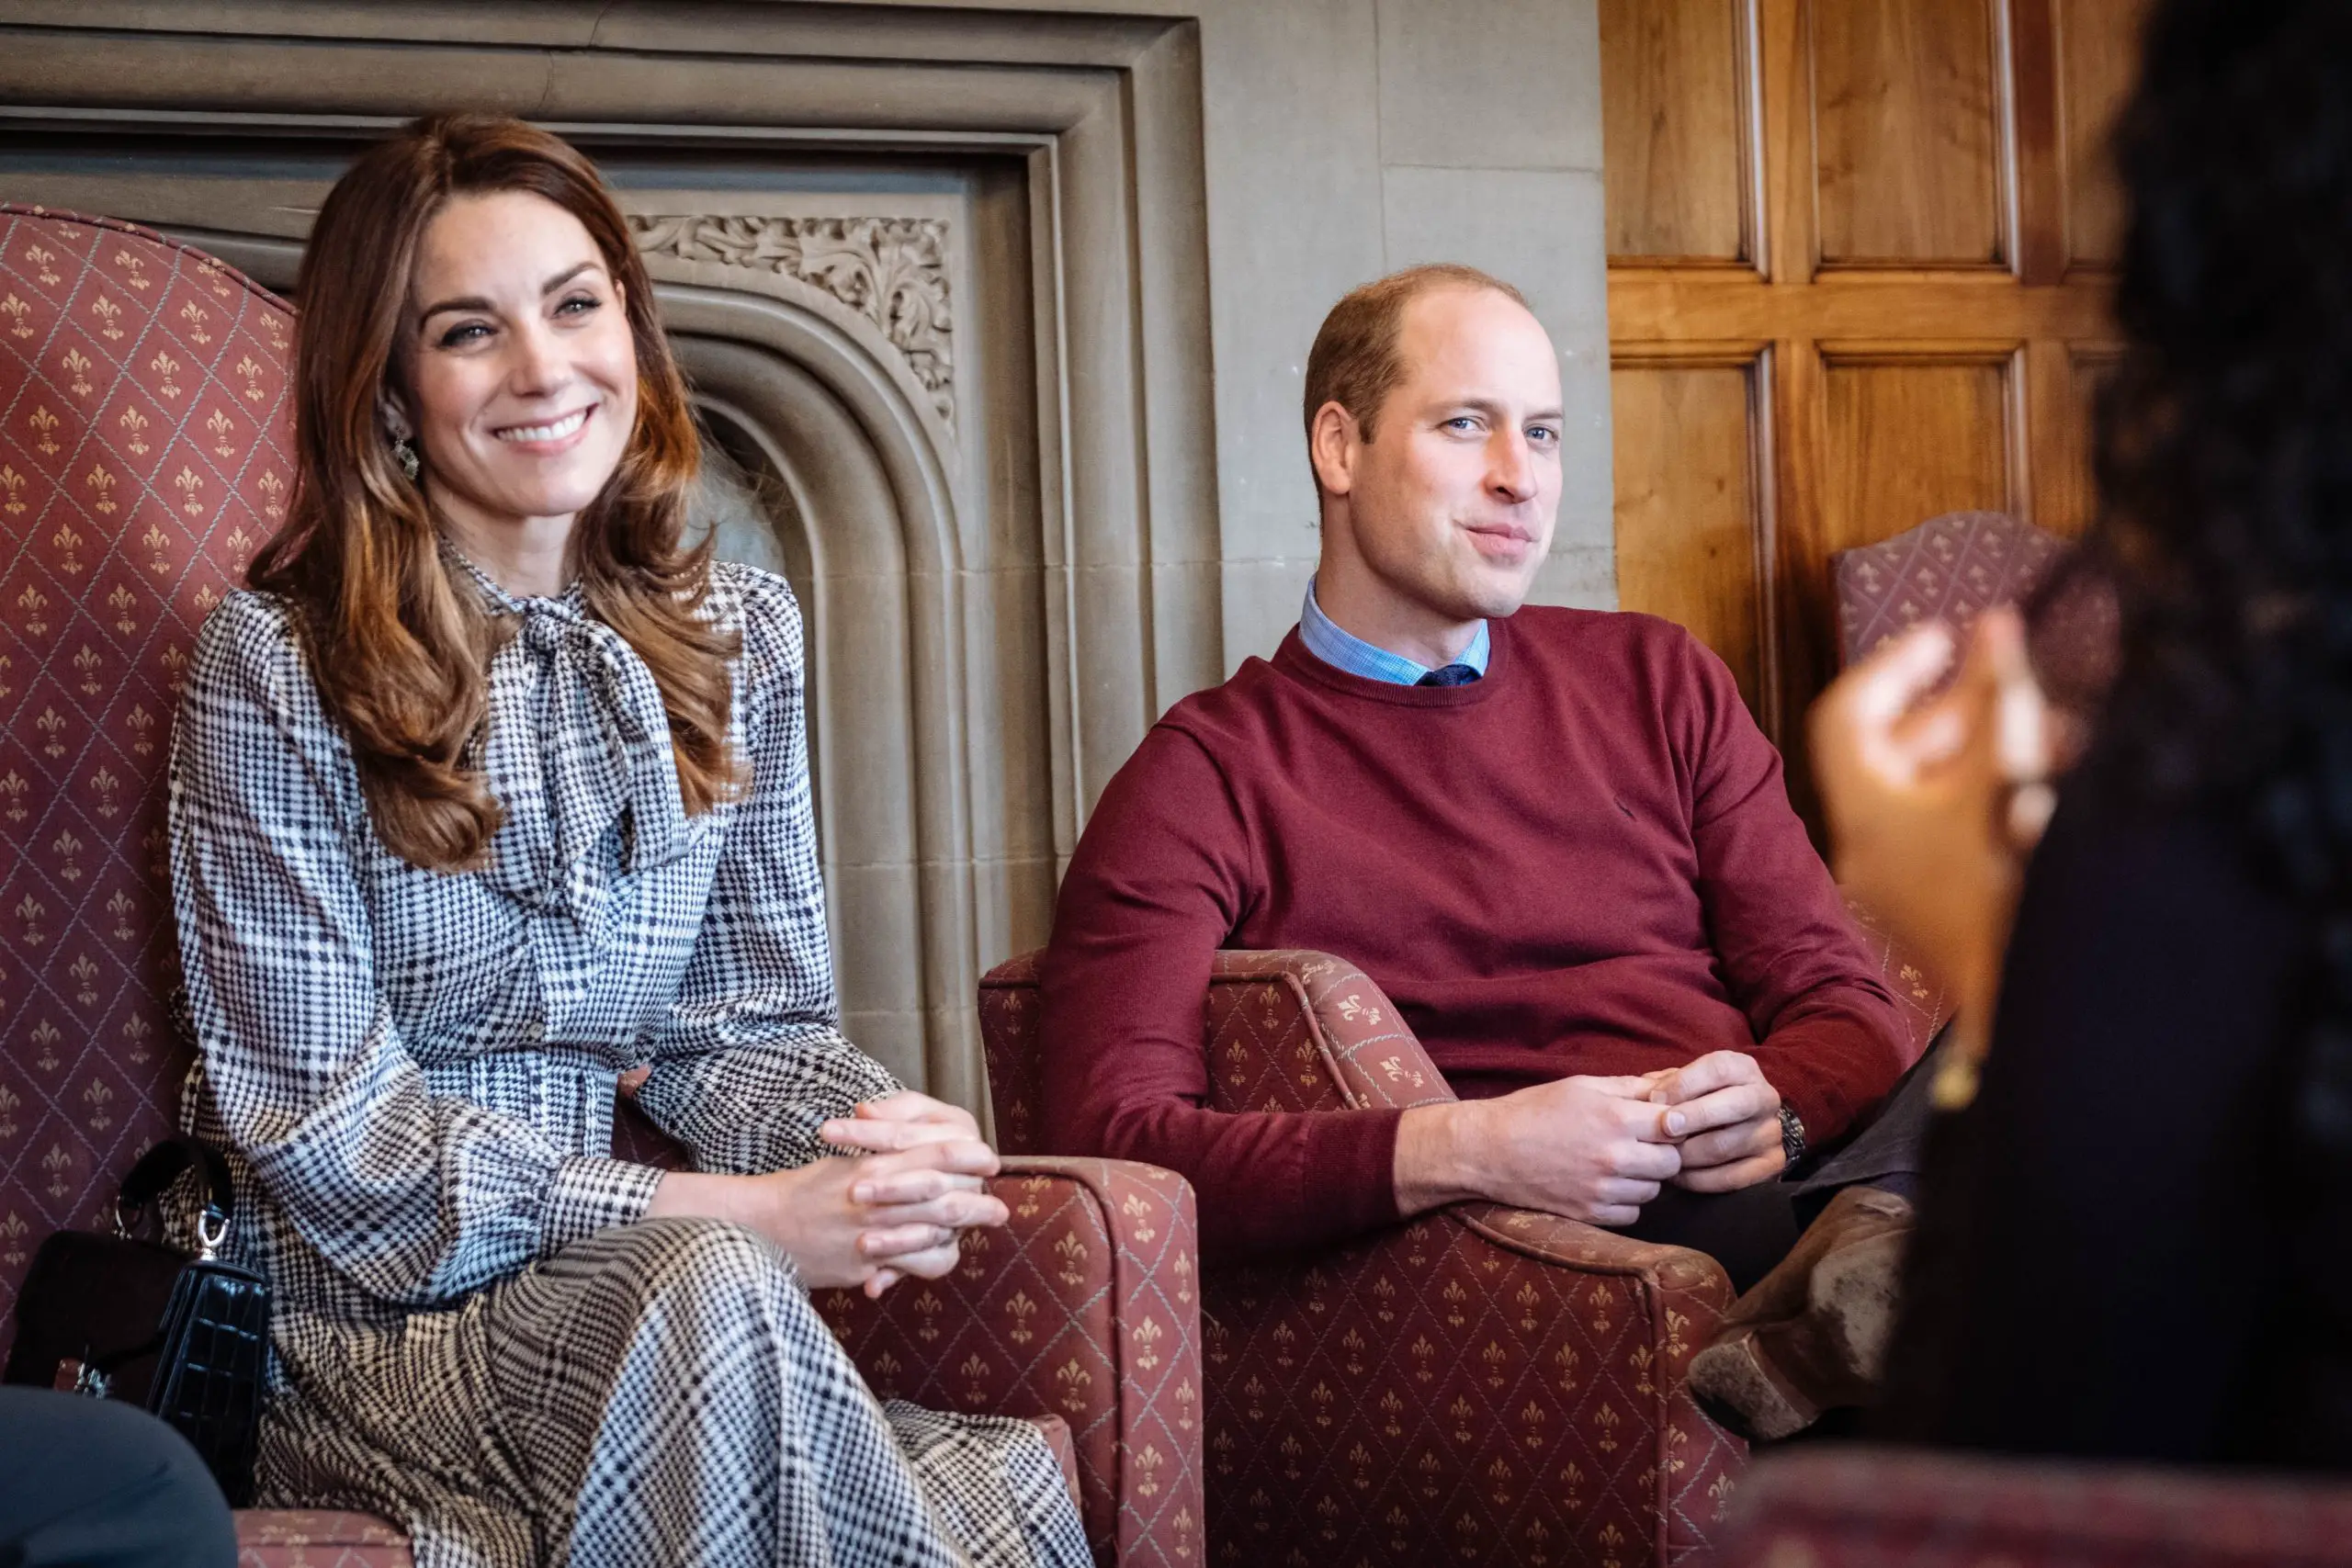 The Duke and Duchess of Cambridge visited Bradford in January 2020